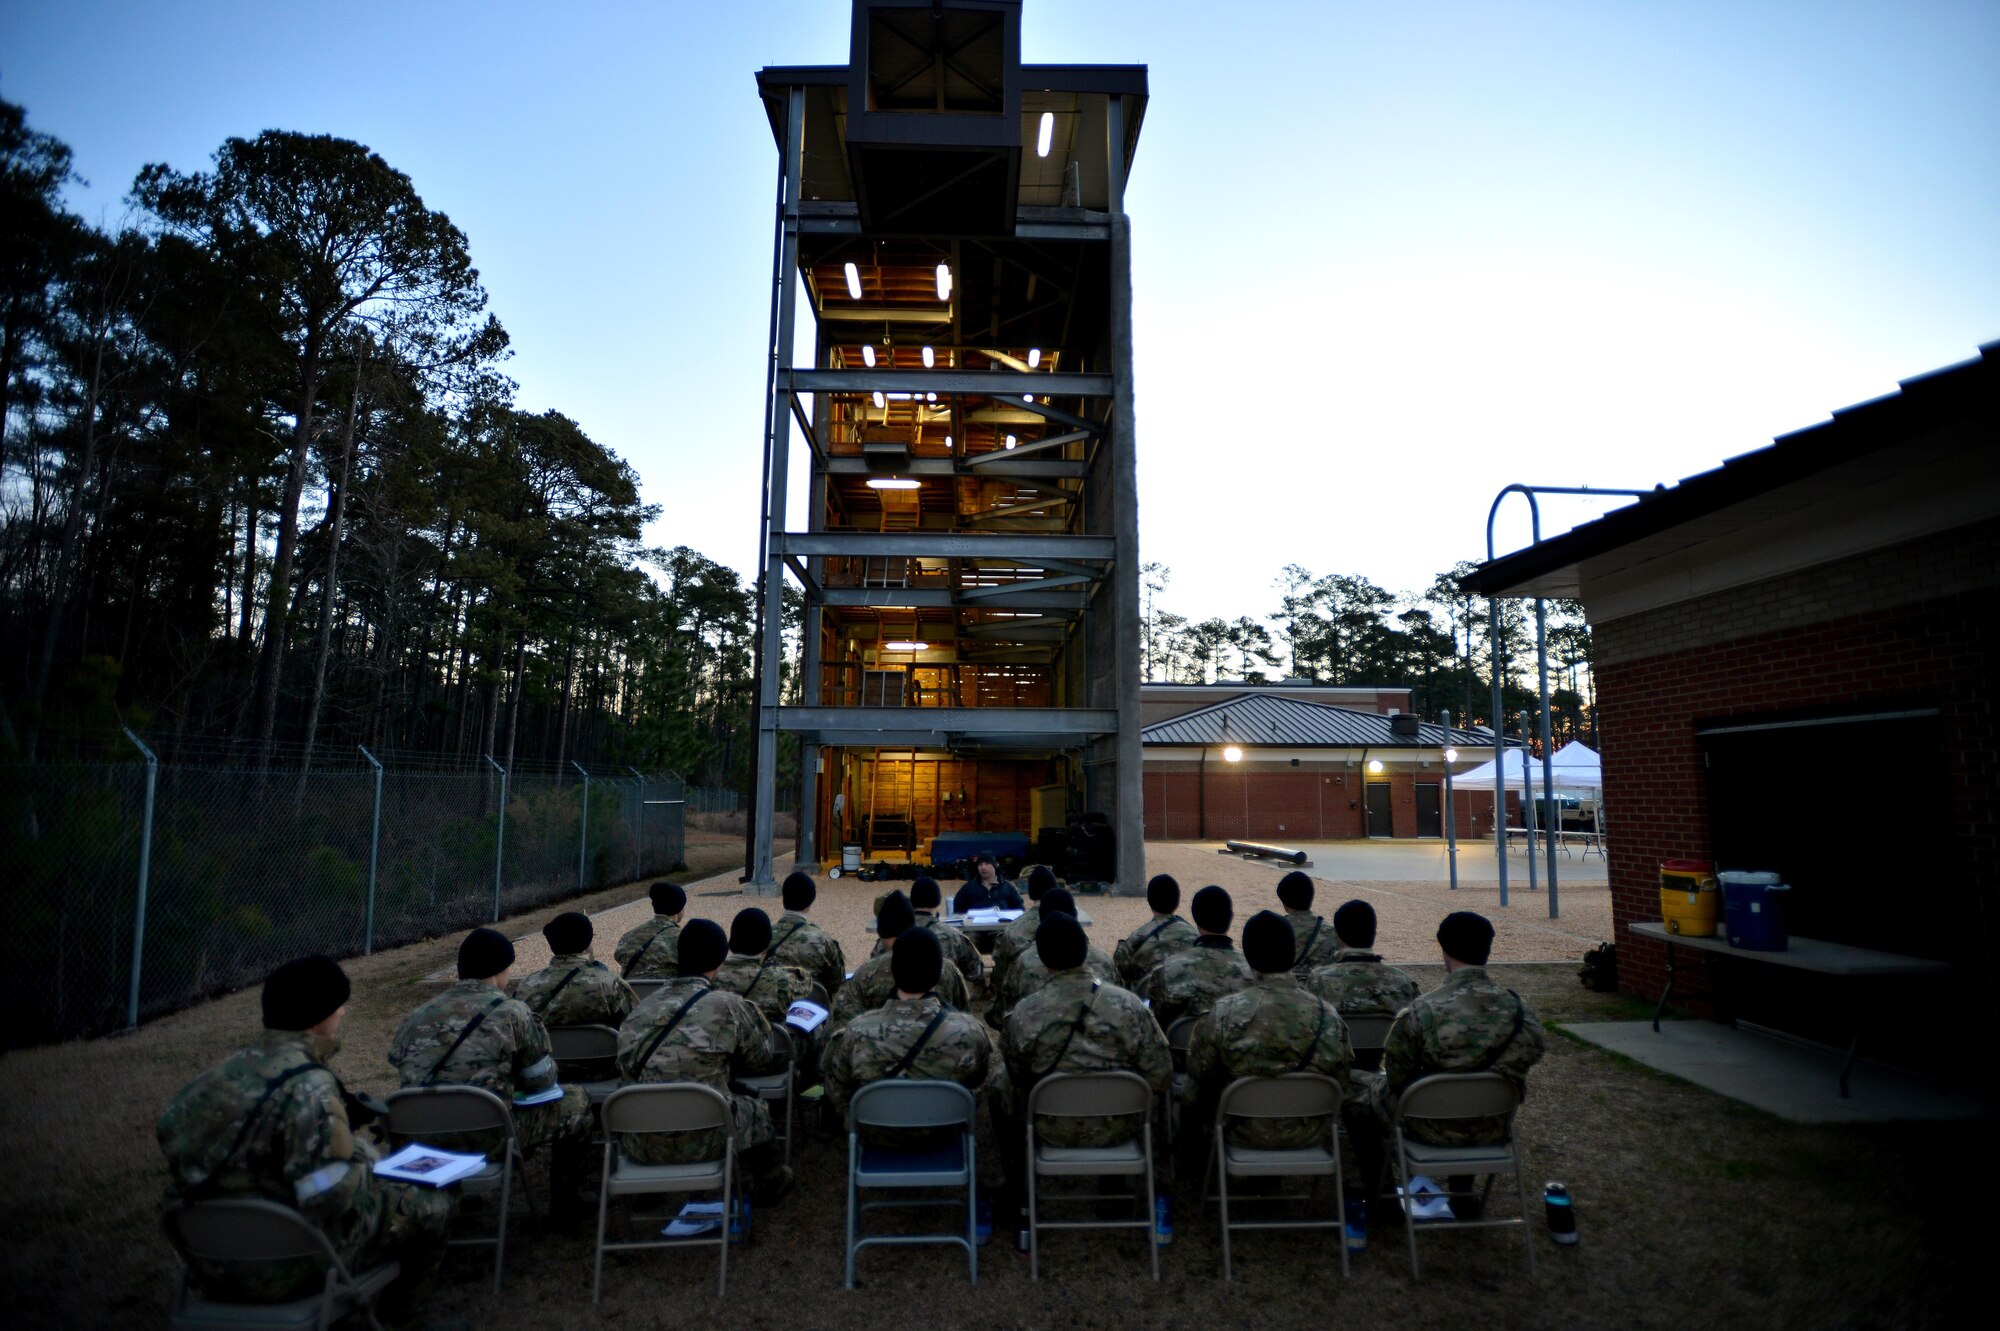 U.S. Air Force Combat Control trainees assigned to Operating Location C, 342nd Training Squadron, receive academic instruction prior to fast-rope training during a brisk winter morning, Feb. 13, 2015 at Pope Army Airfield, North Carolina. Academic instruction is a large part of fast-rope training for CCT students who are trying to learn and hone the skillset. (U.S. Air Force photo by Staff Sgt. Kenny Holston)    